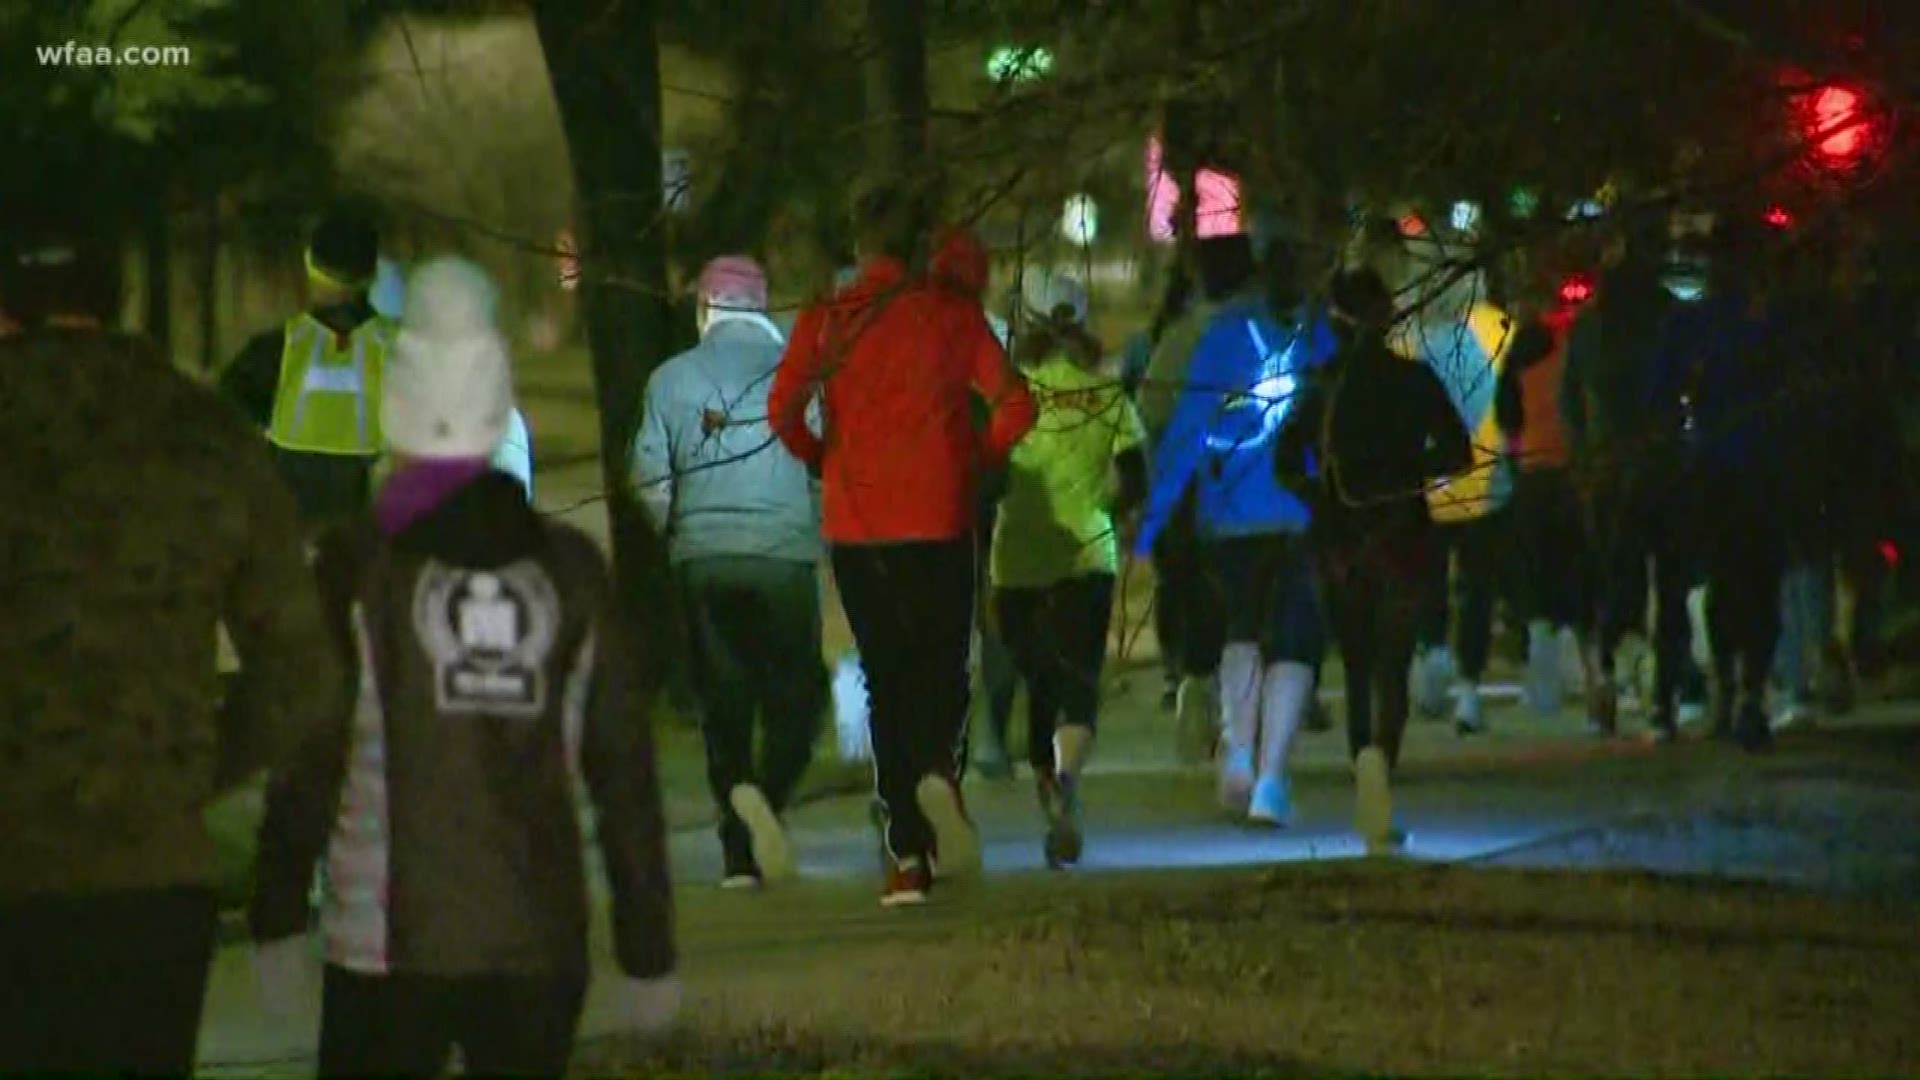 Frisco police are investigating after a woman was attacked by a man during an early morning run Monday in The Trails neighborhood.